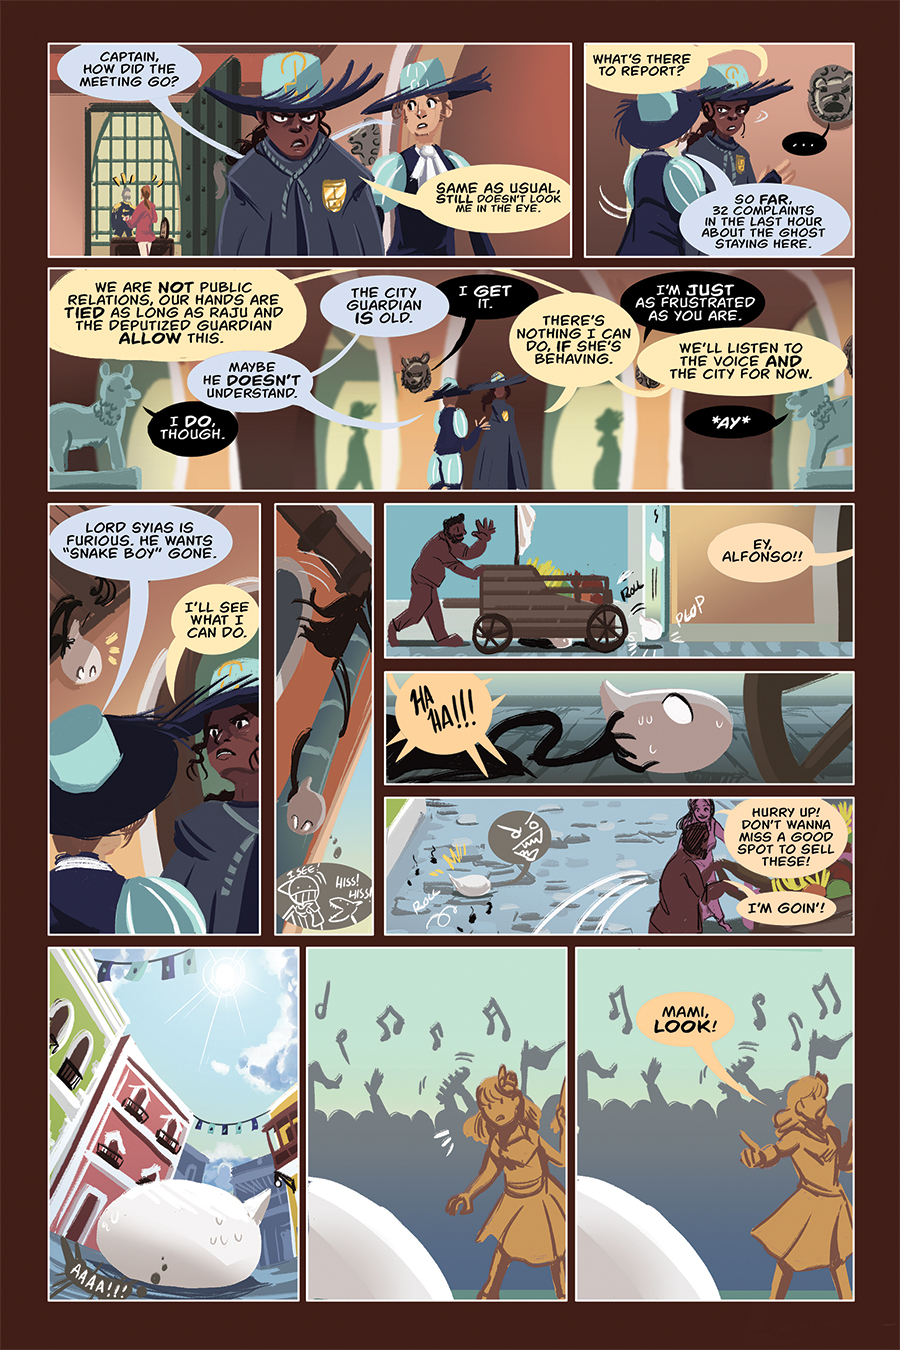 Chapter 8, page 2